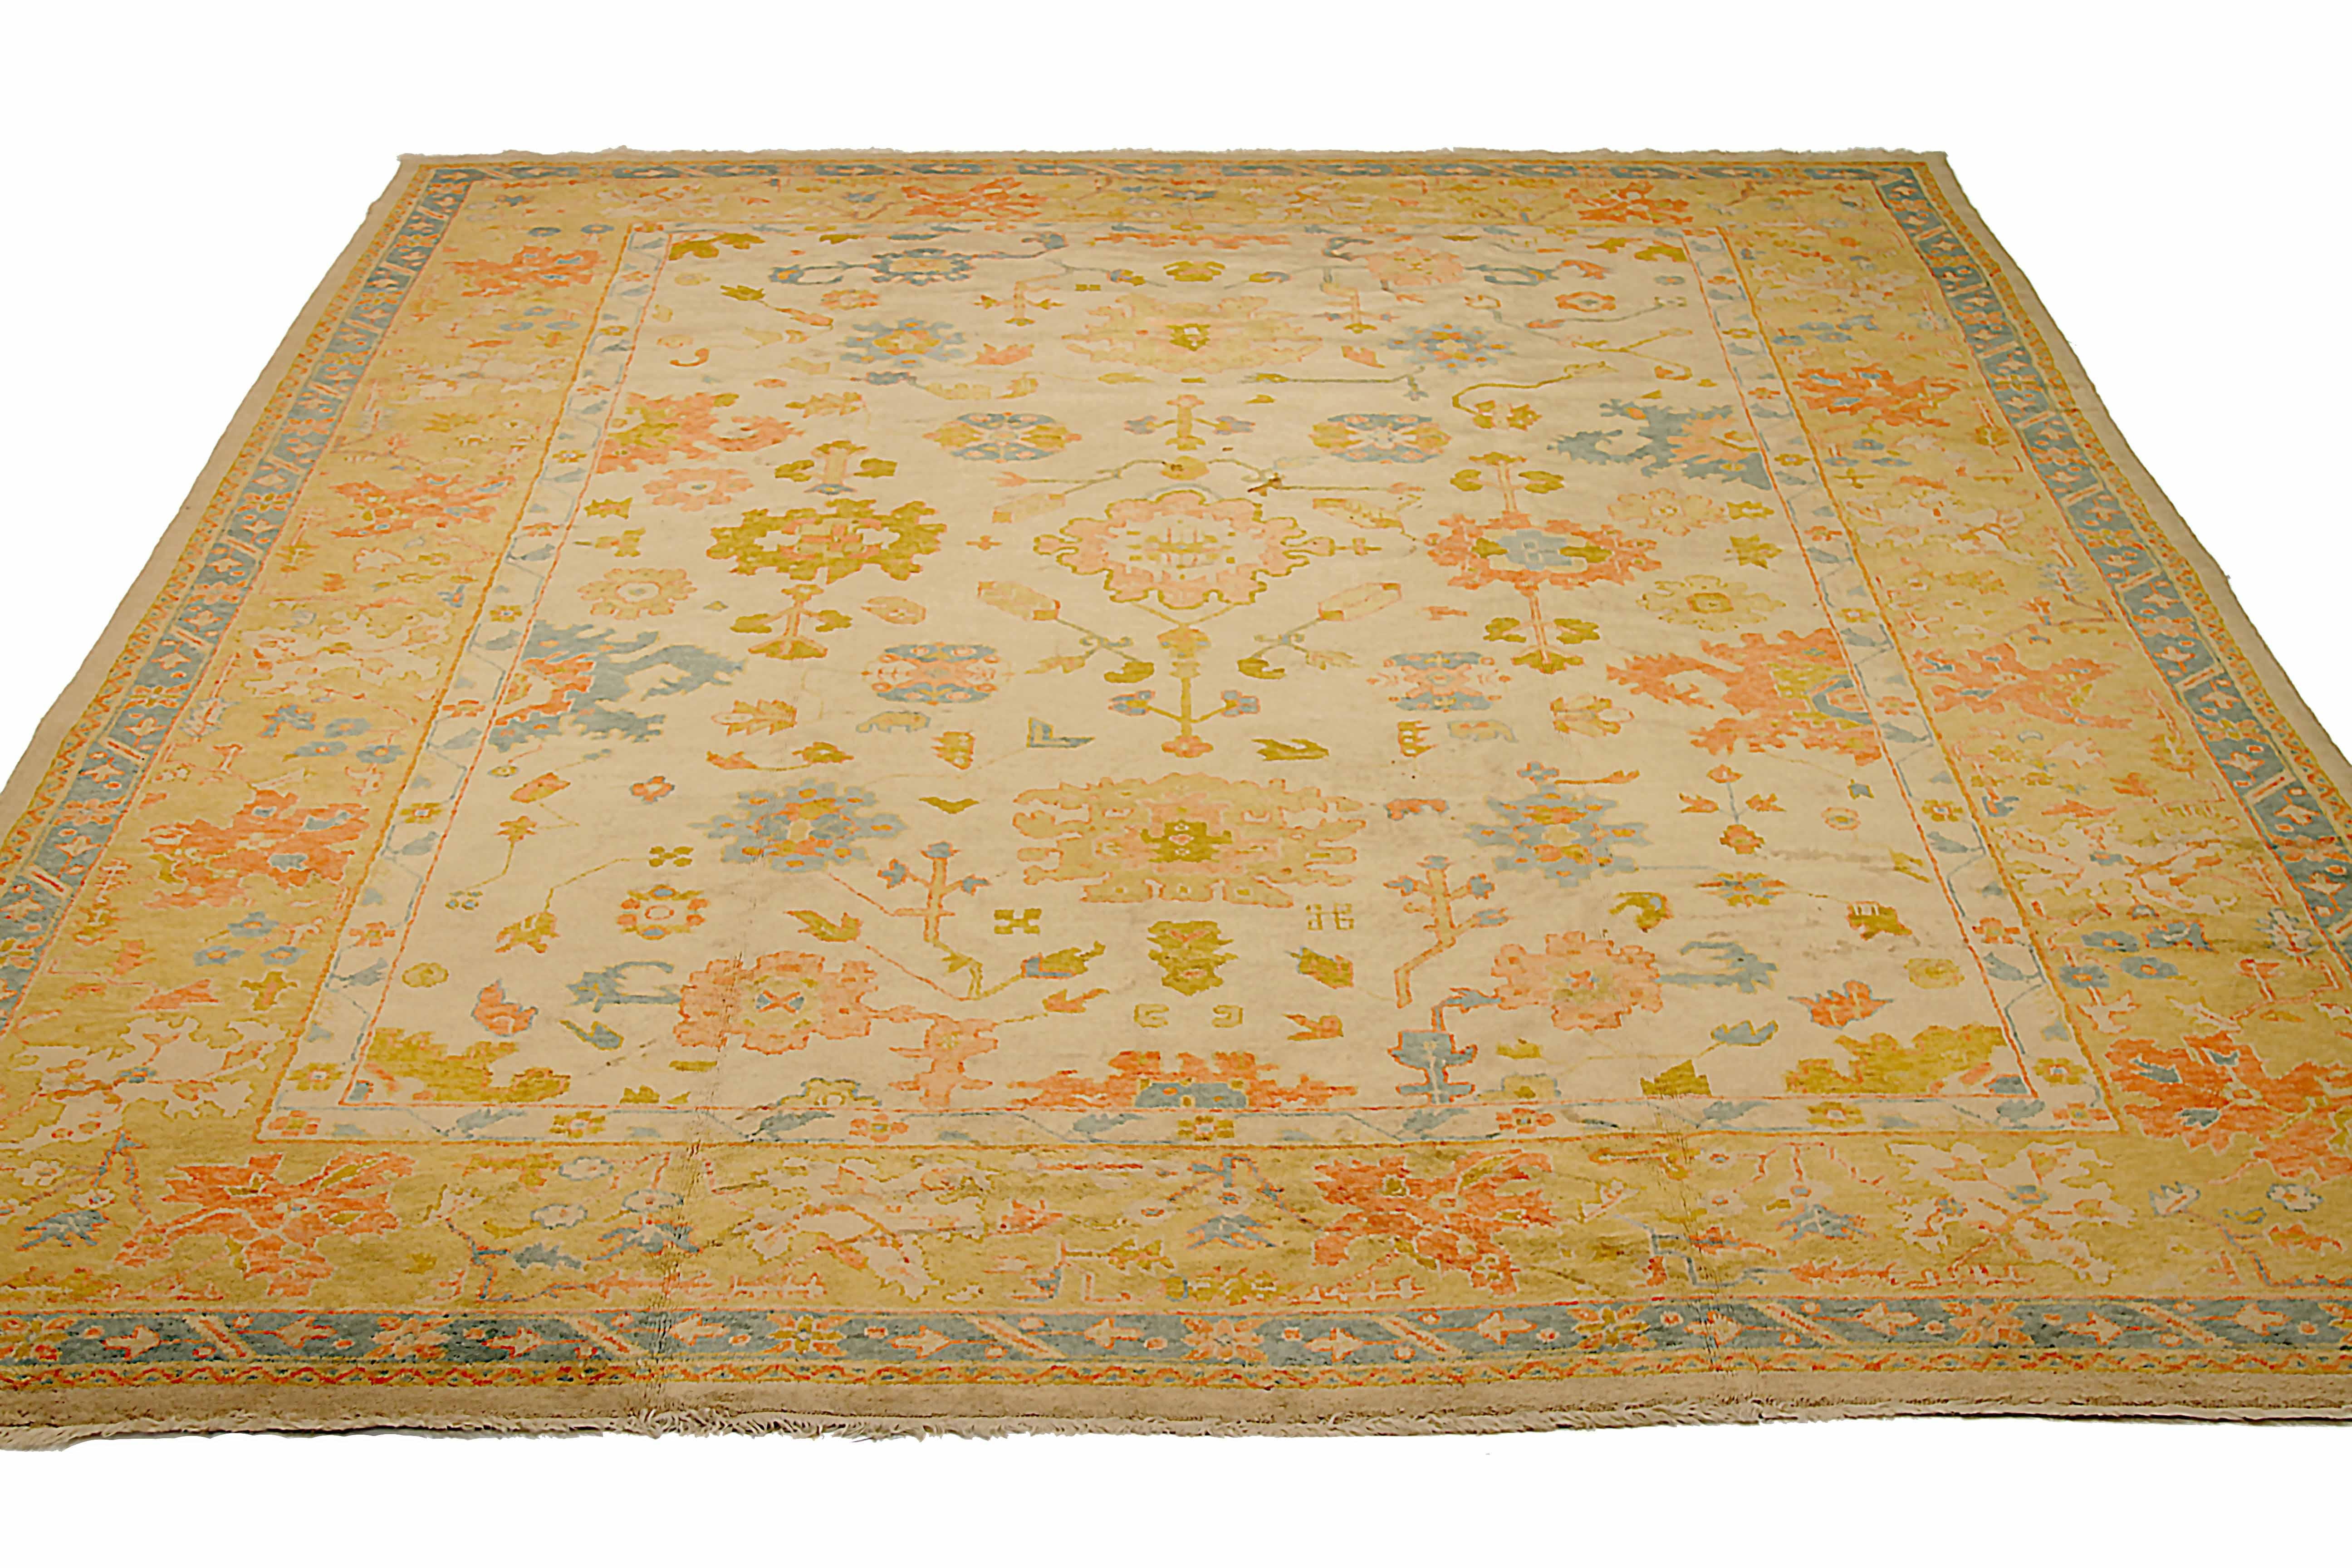 New area rug handwoven from the finest sheep’s wool. It’s colored with all-natural vegetable dyes that are safe for humans and pets. It’s a traditional Oushak design handwoven by expert artisans. It’s a lovely area rug that can be incorporated with